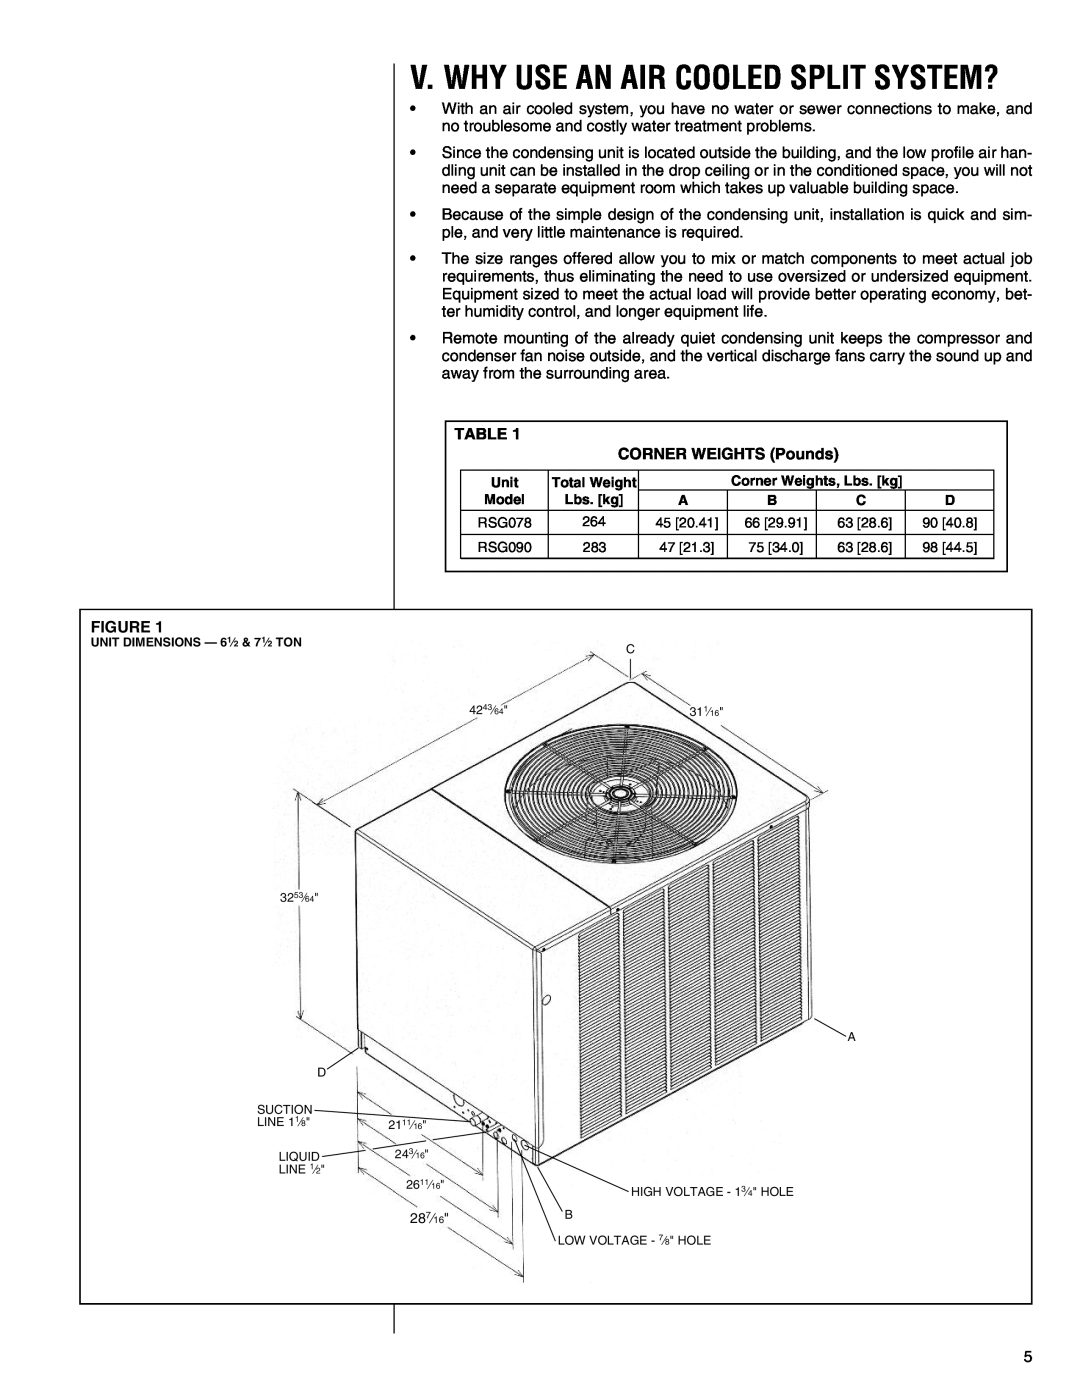 Heat Controller R-410A installation instructions V. Why Use An Air Cooled Split System?, TABLE CORNER WEIGHTS Pounds 